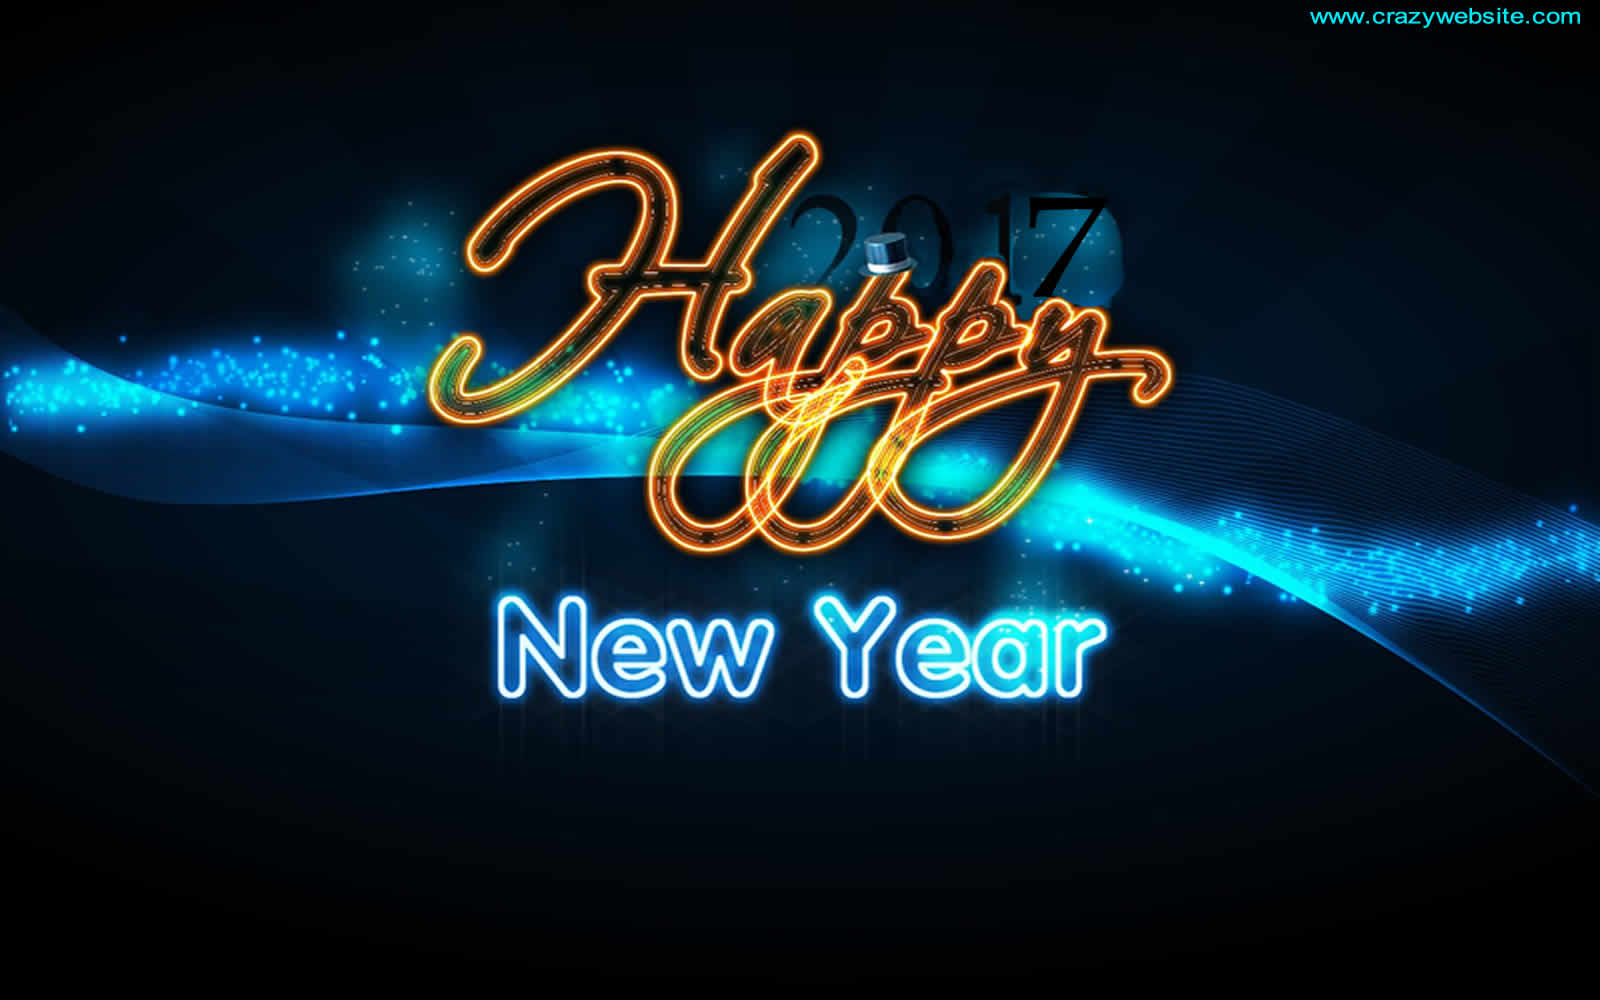 Wallpaper Backgrounds Free New Year 2016 / 2017 Graphic - Happy New Year Flashing Lights , HD Wallpaper & Backgrounds